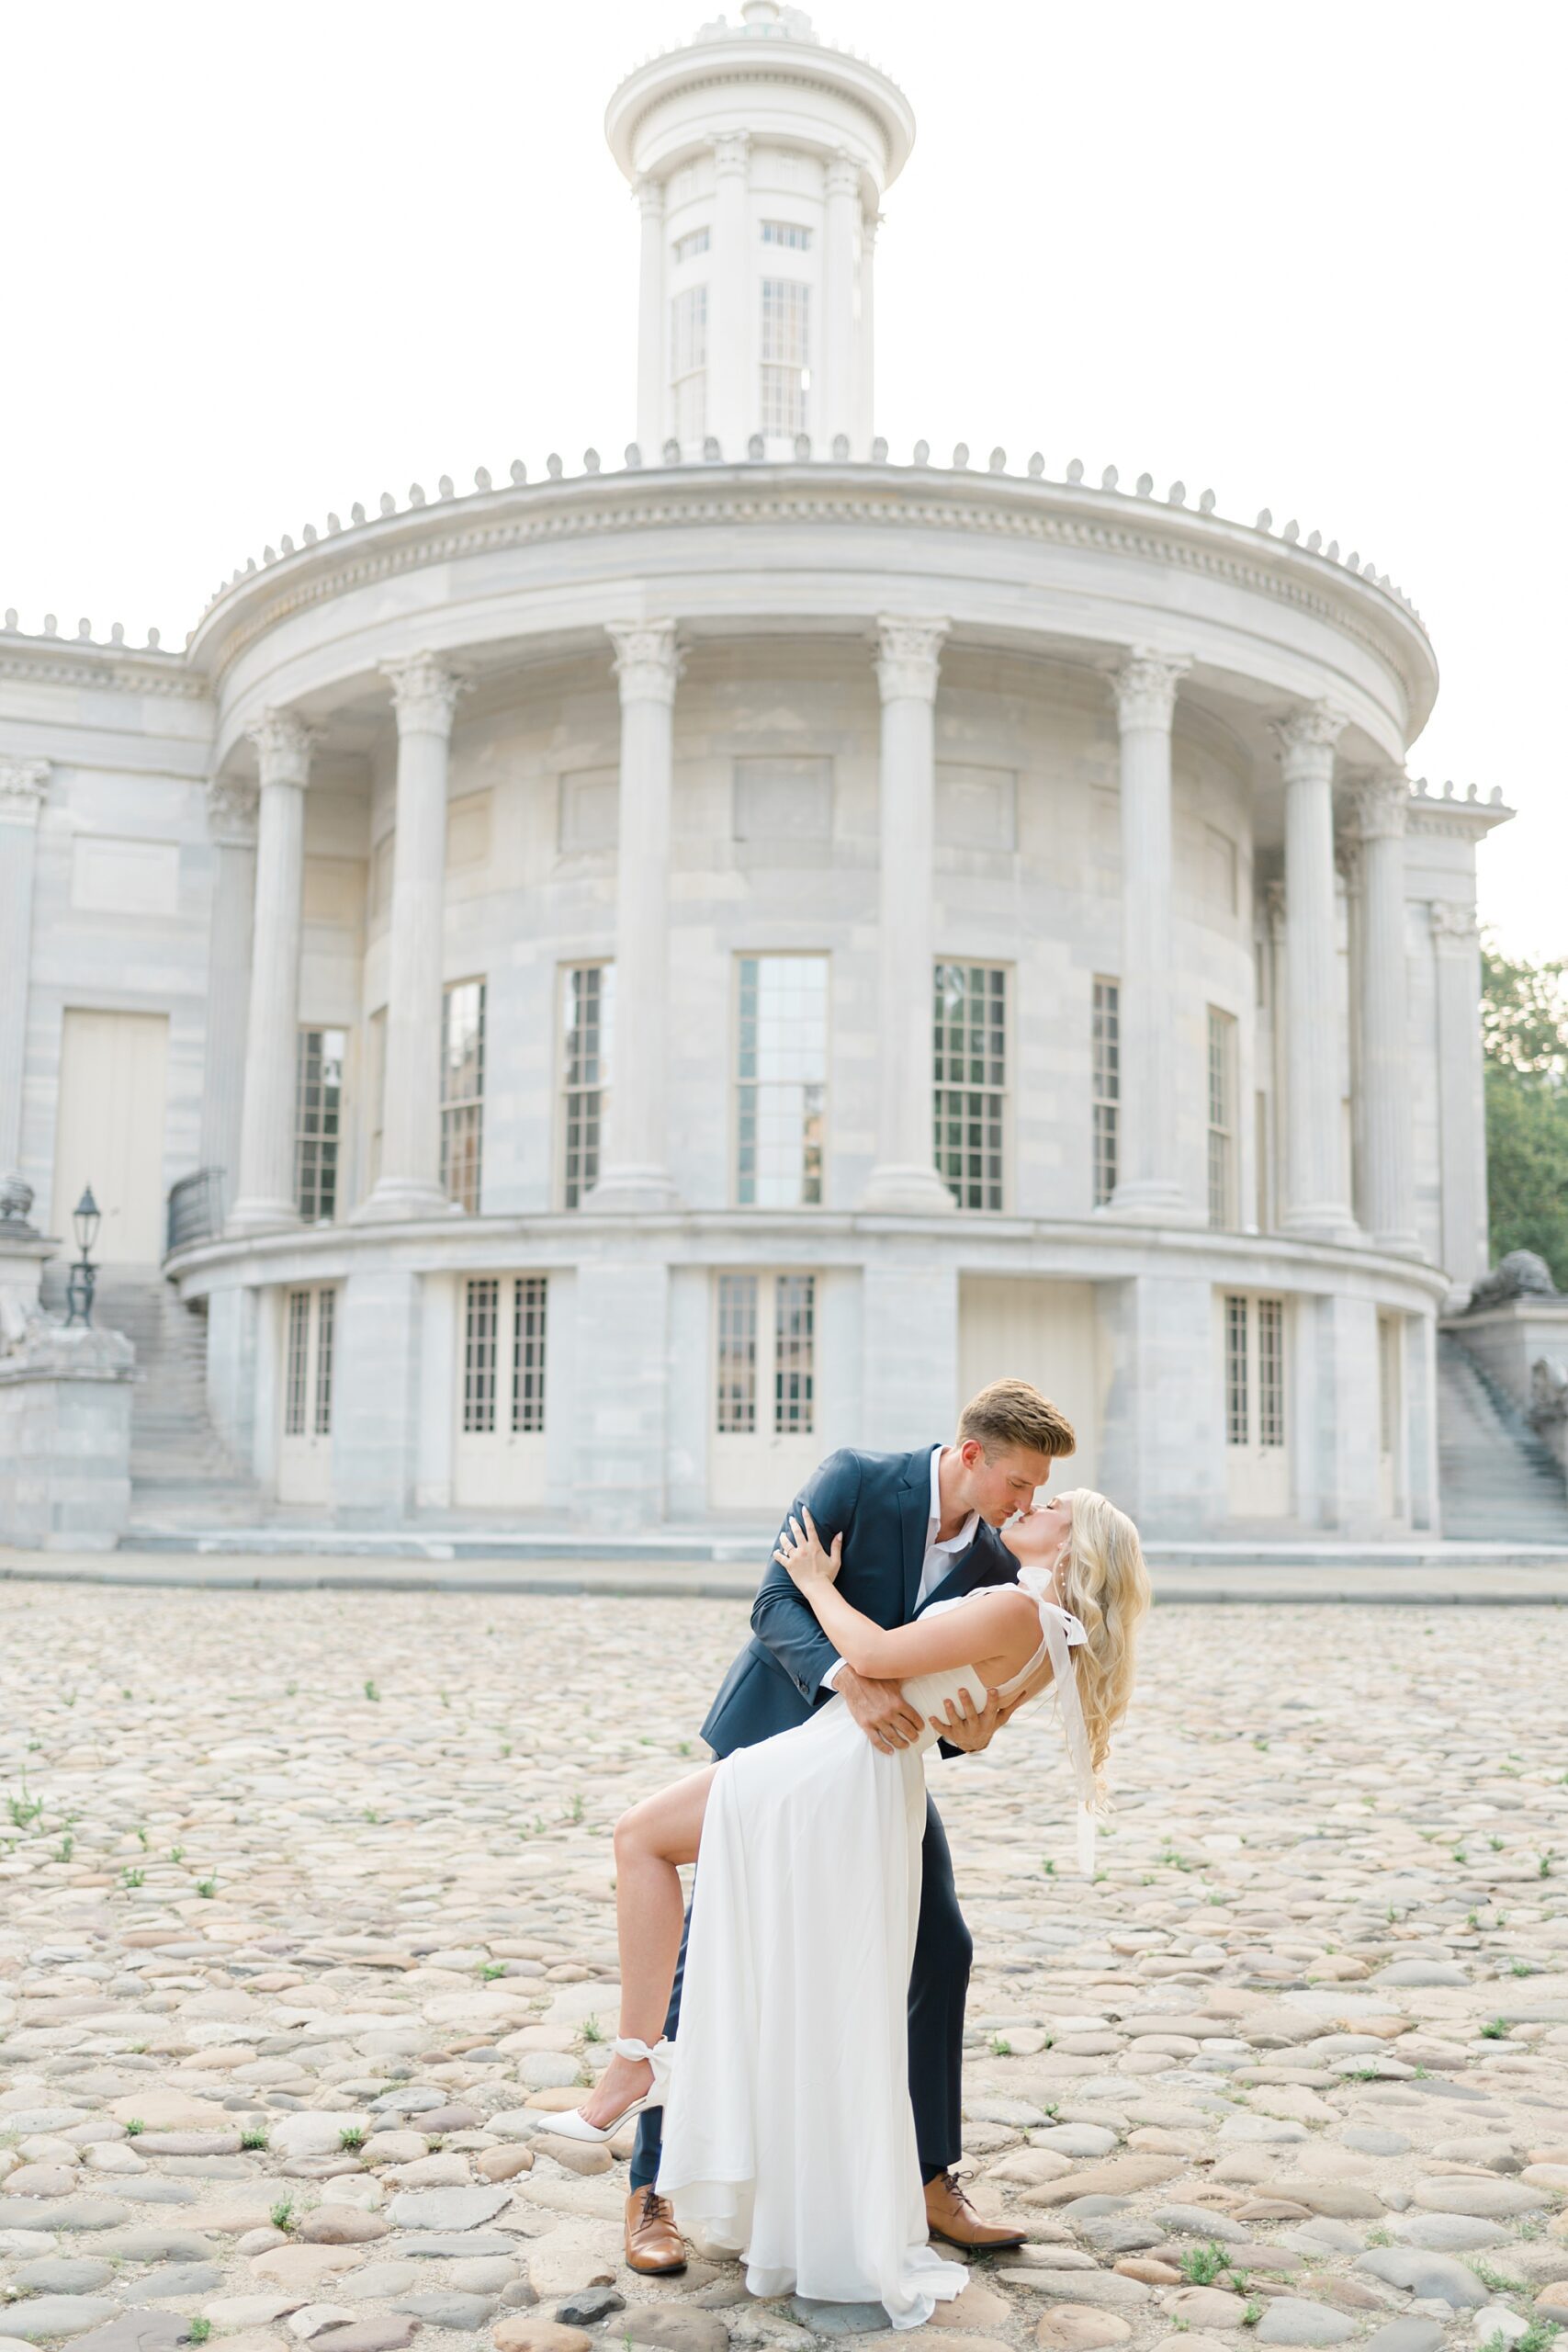 romantic wedding portaits from Classic Engagement Session at Merchants’ Exchange Building